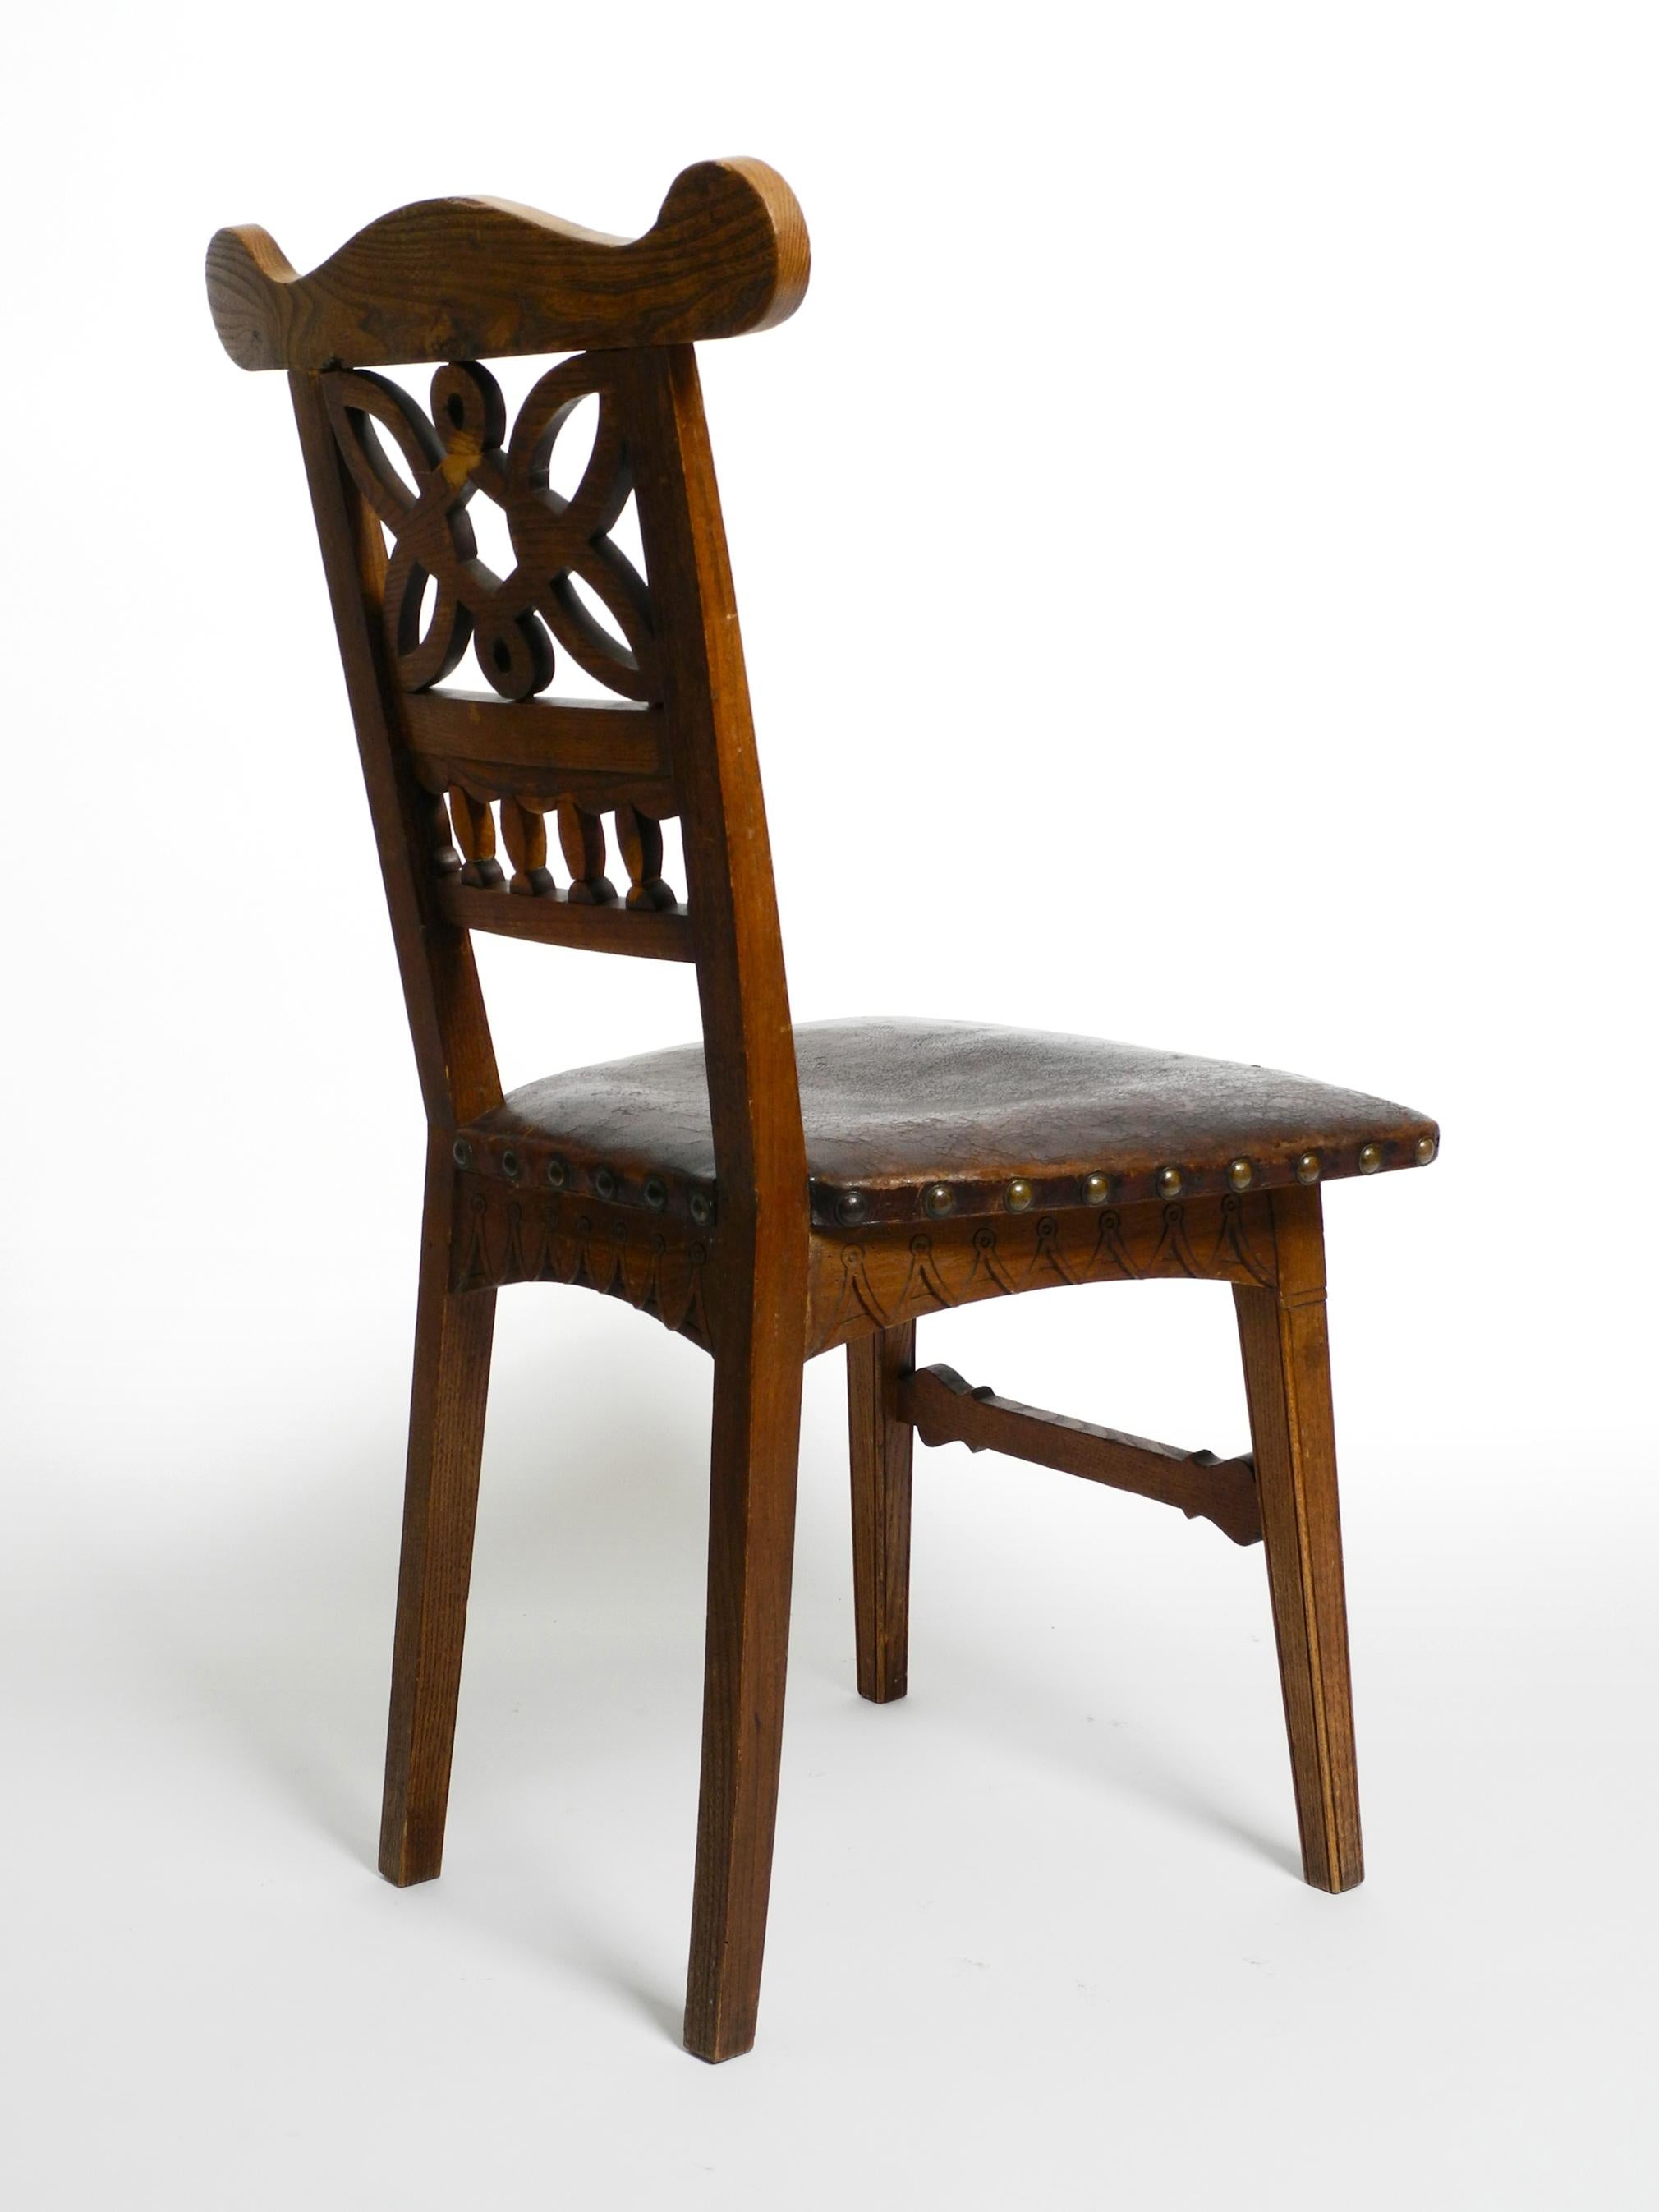 2 Art Nouveau Oak Chairs Still with the Original Leather Seats from Around 1900 For Sale 12